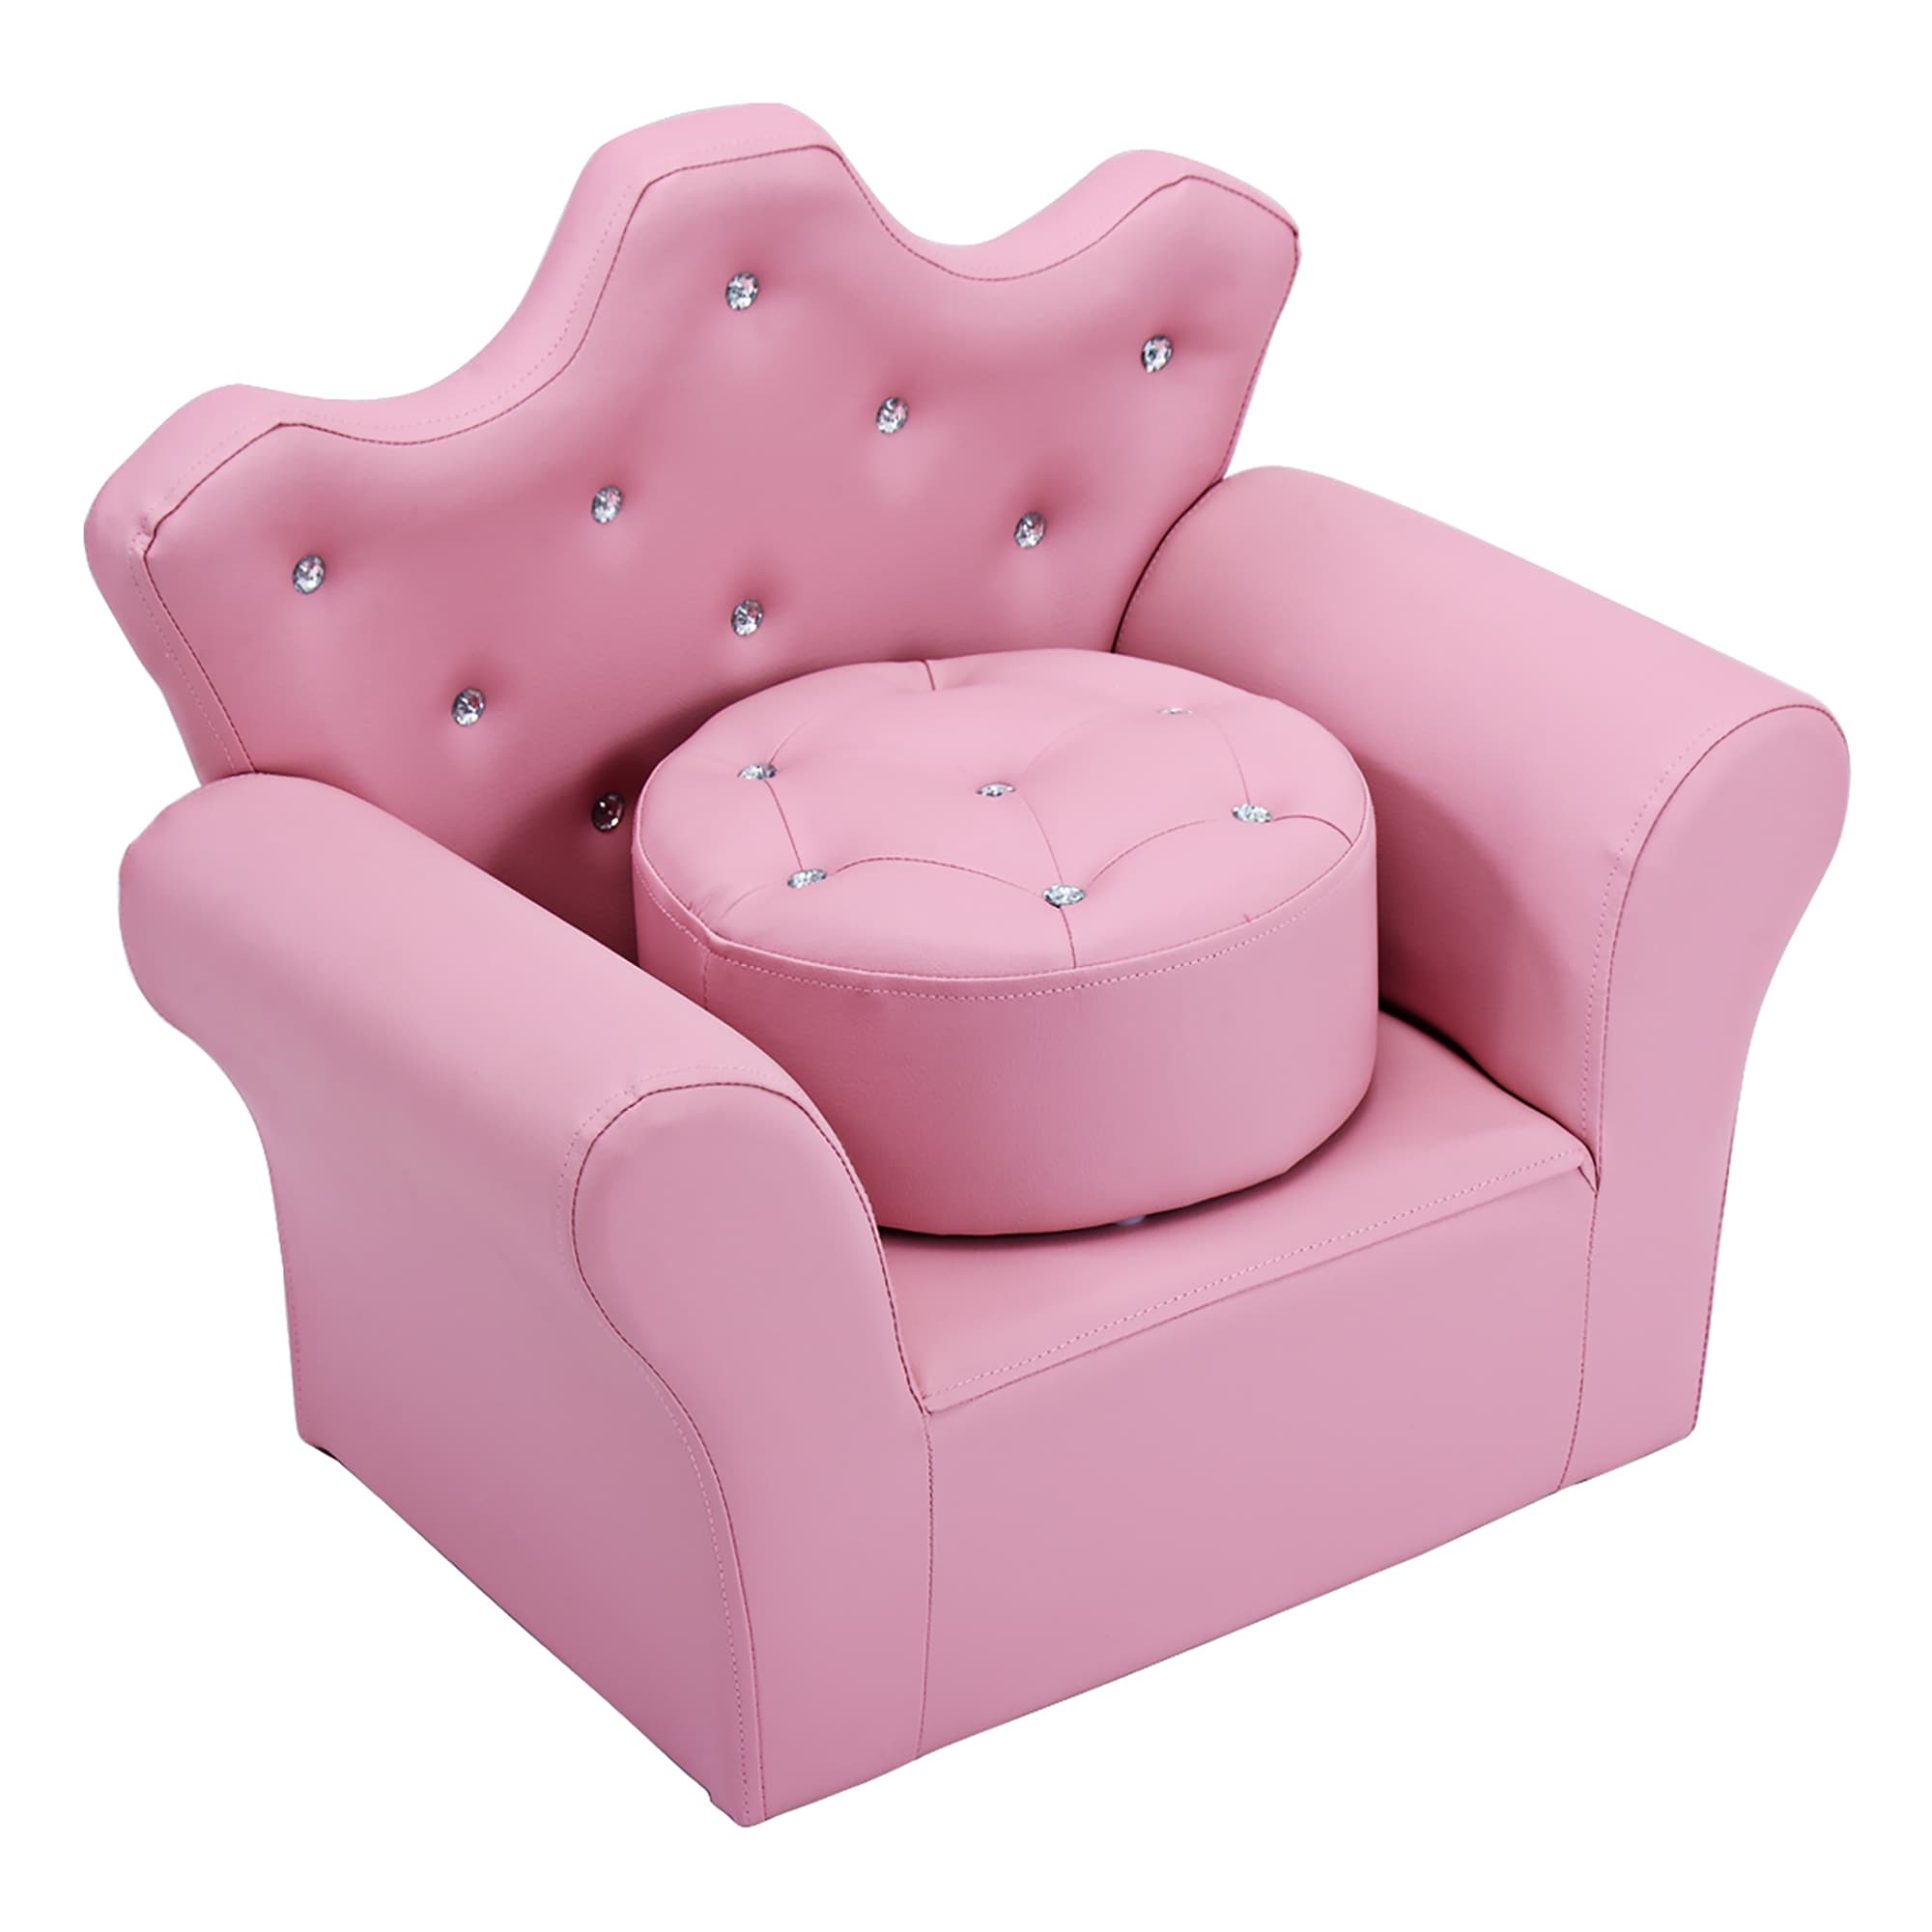 Blue Kids Sofa Set,Children PVC Armchair Chair with Ottoman,Princess Sofa with Embedded Crystal. 